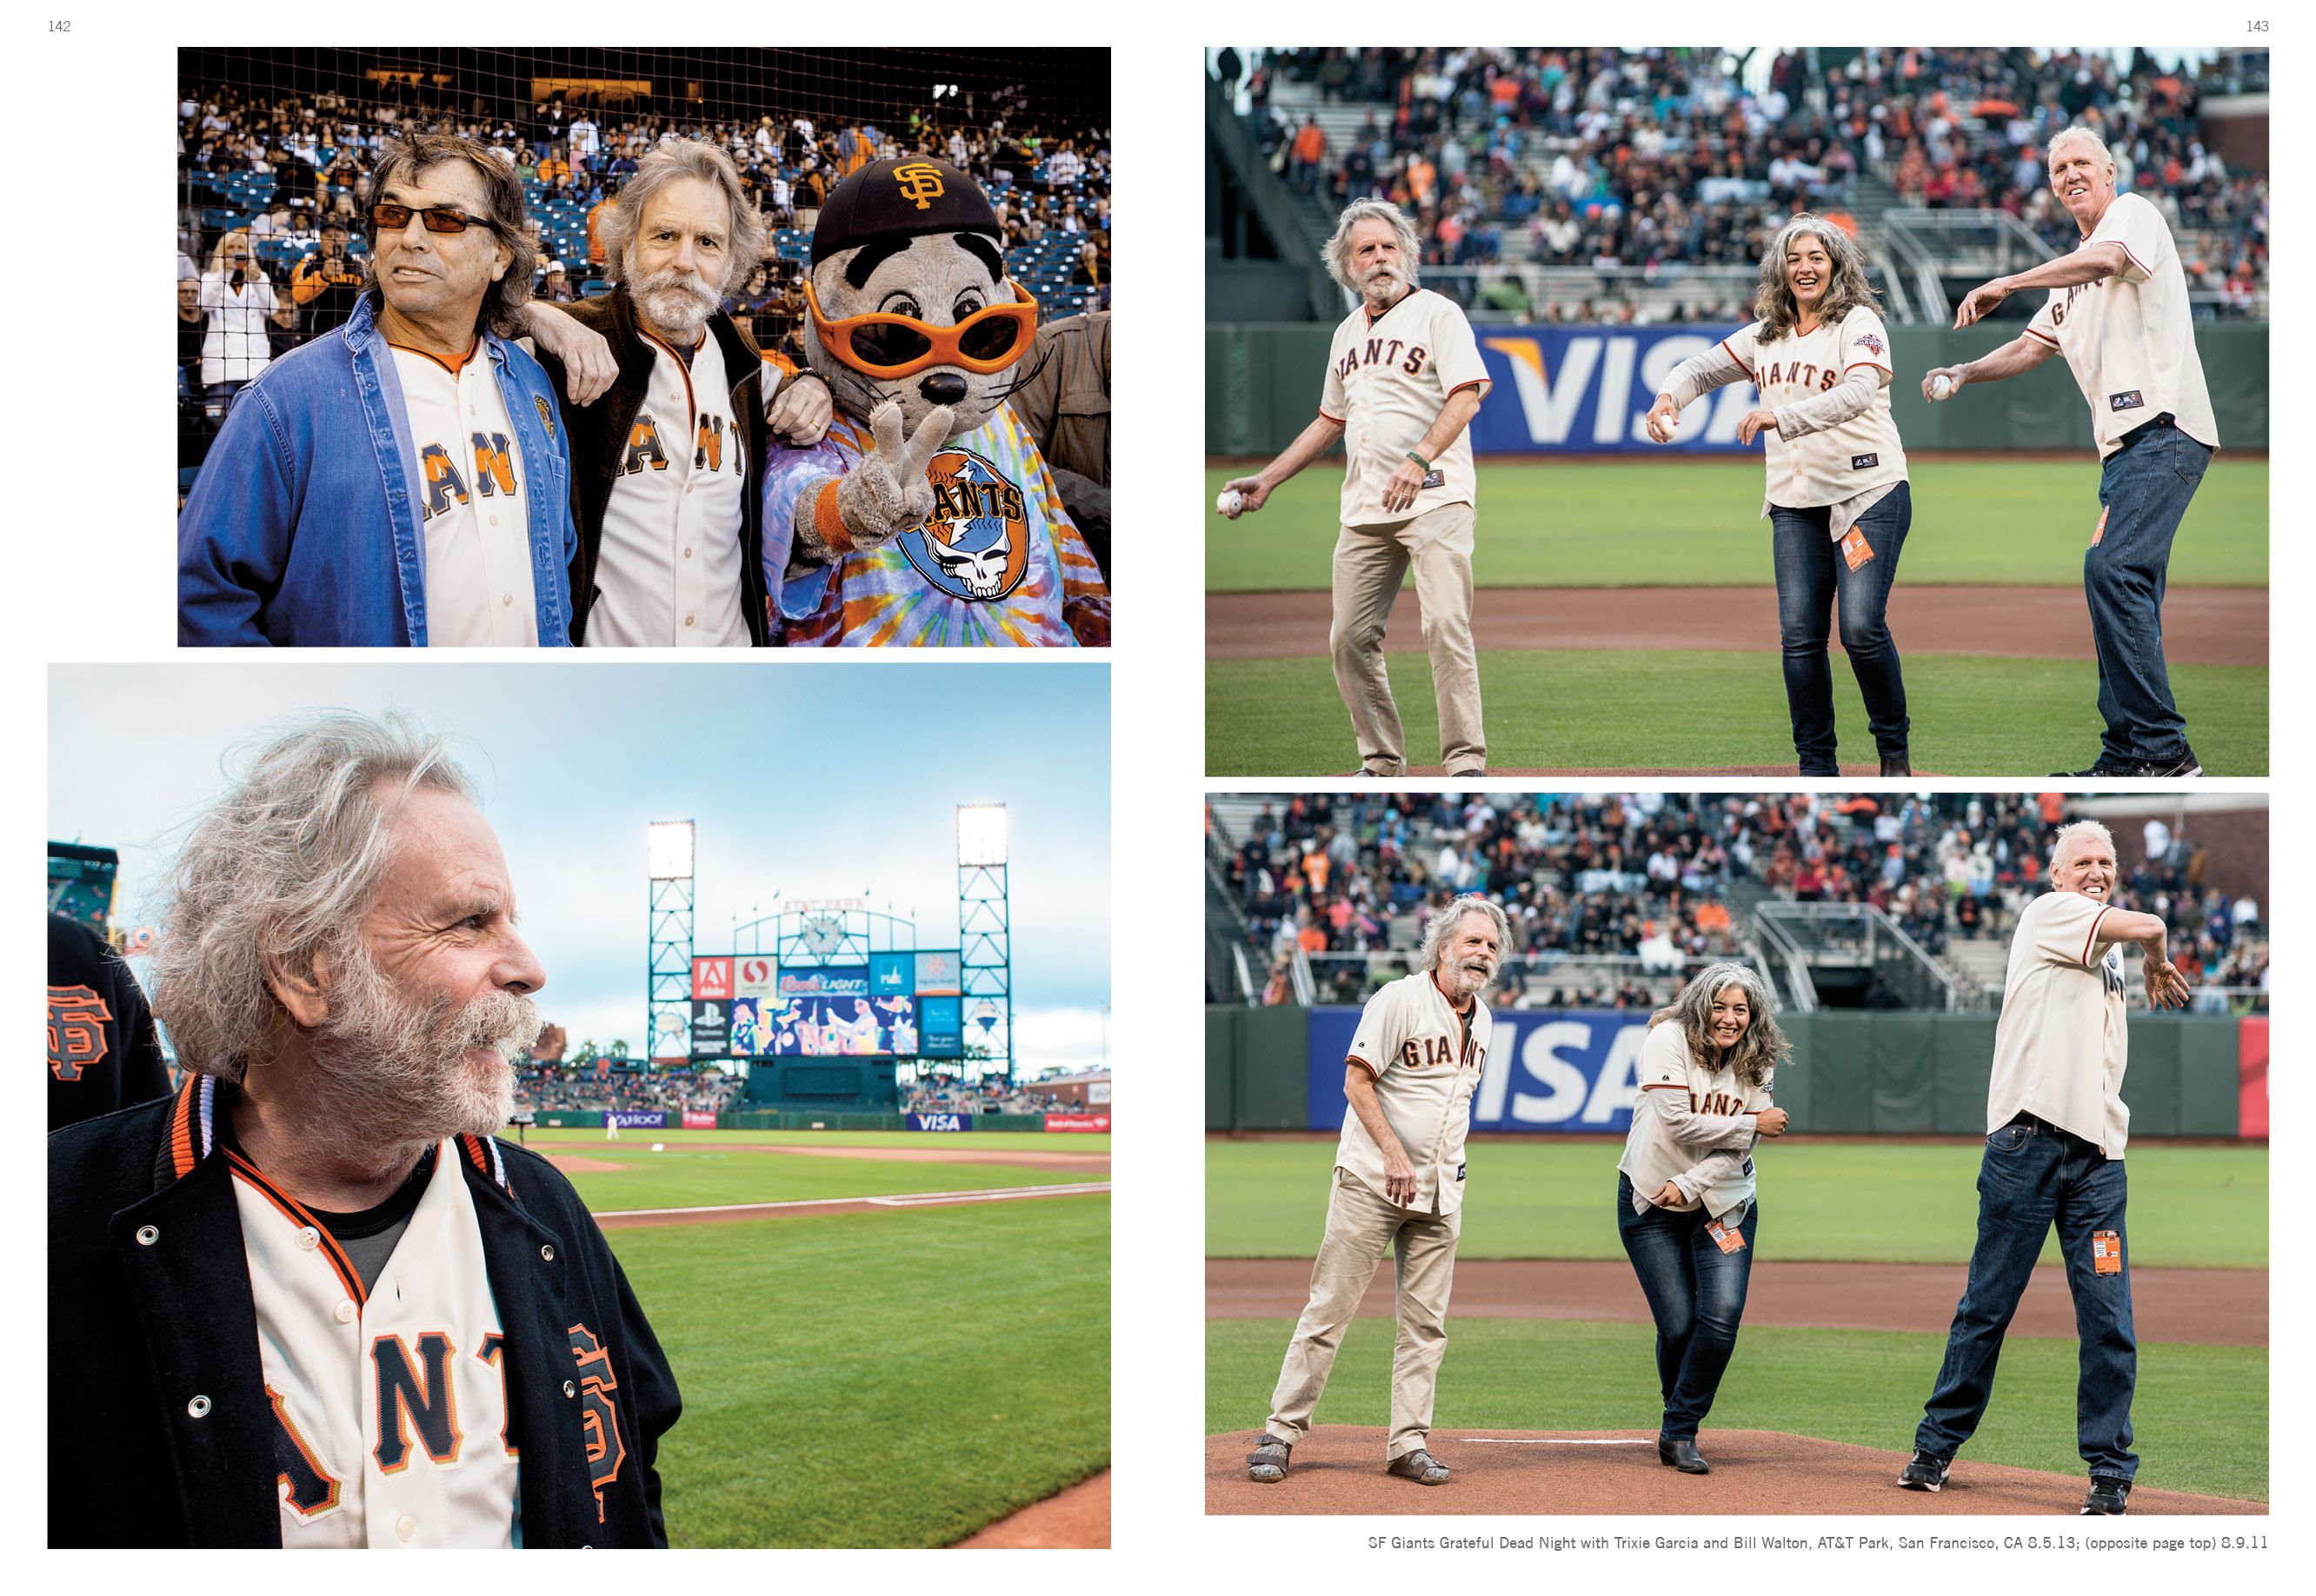 Grateful Dead Night at the San Francisco Giants, 2011 and 2013